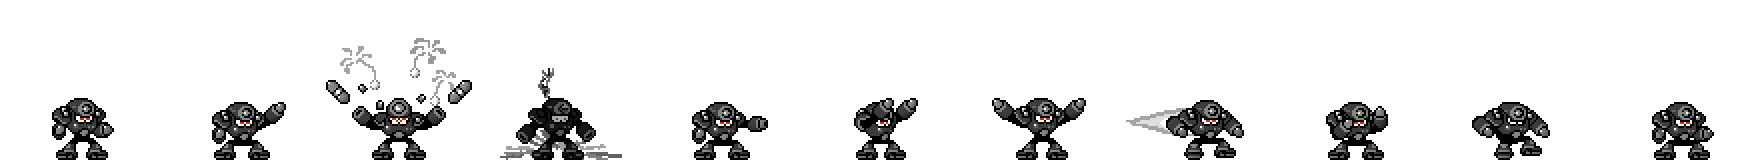 Napalm Man (Darkness Alt) | Base Sprite Right<div style="margin-top: 4px; letting-spacing: 1px; font-size: 90%; font-family: Courier New; color: rgb(159, 150, 172);">[robot:right:base]{napalm-man_alt9}</div>